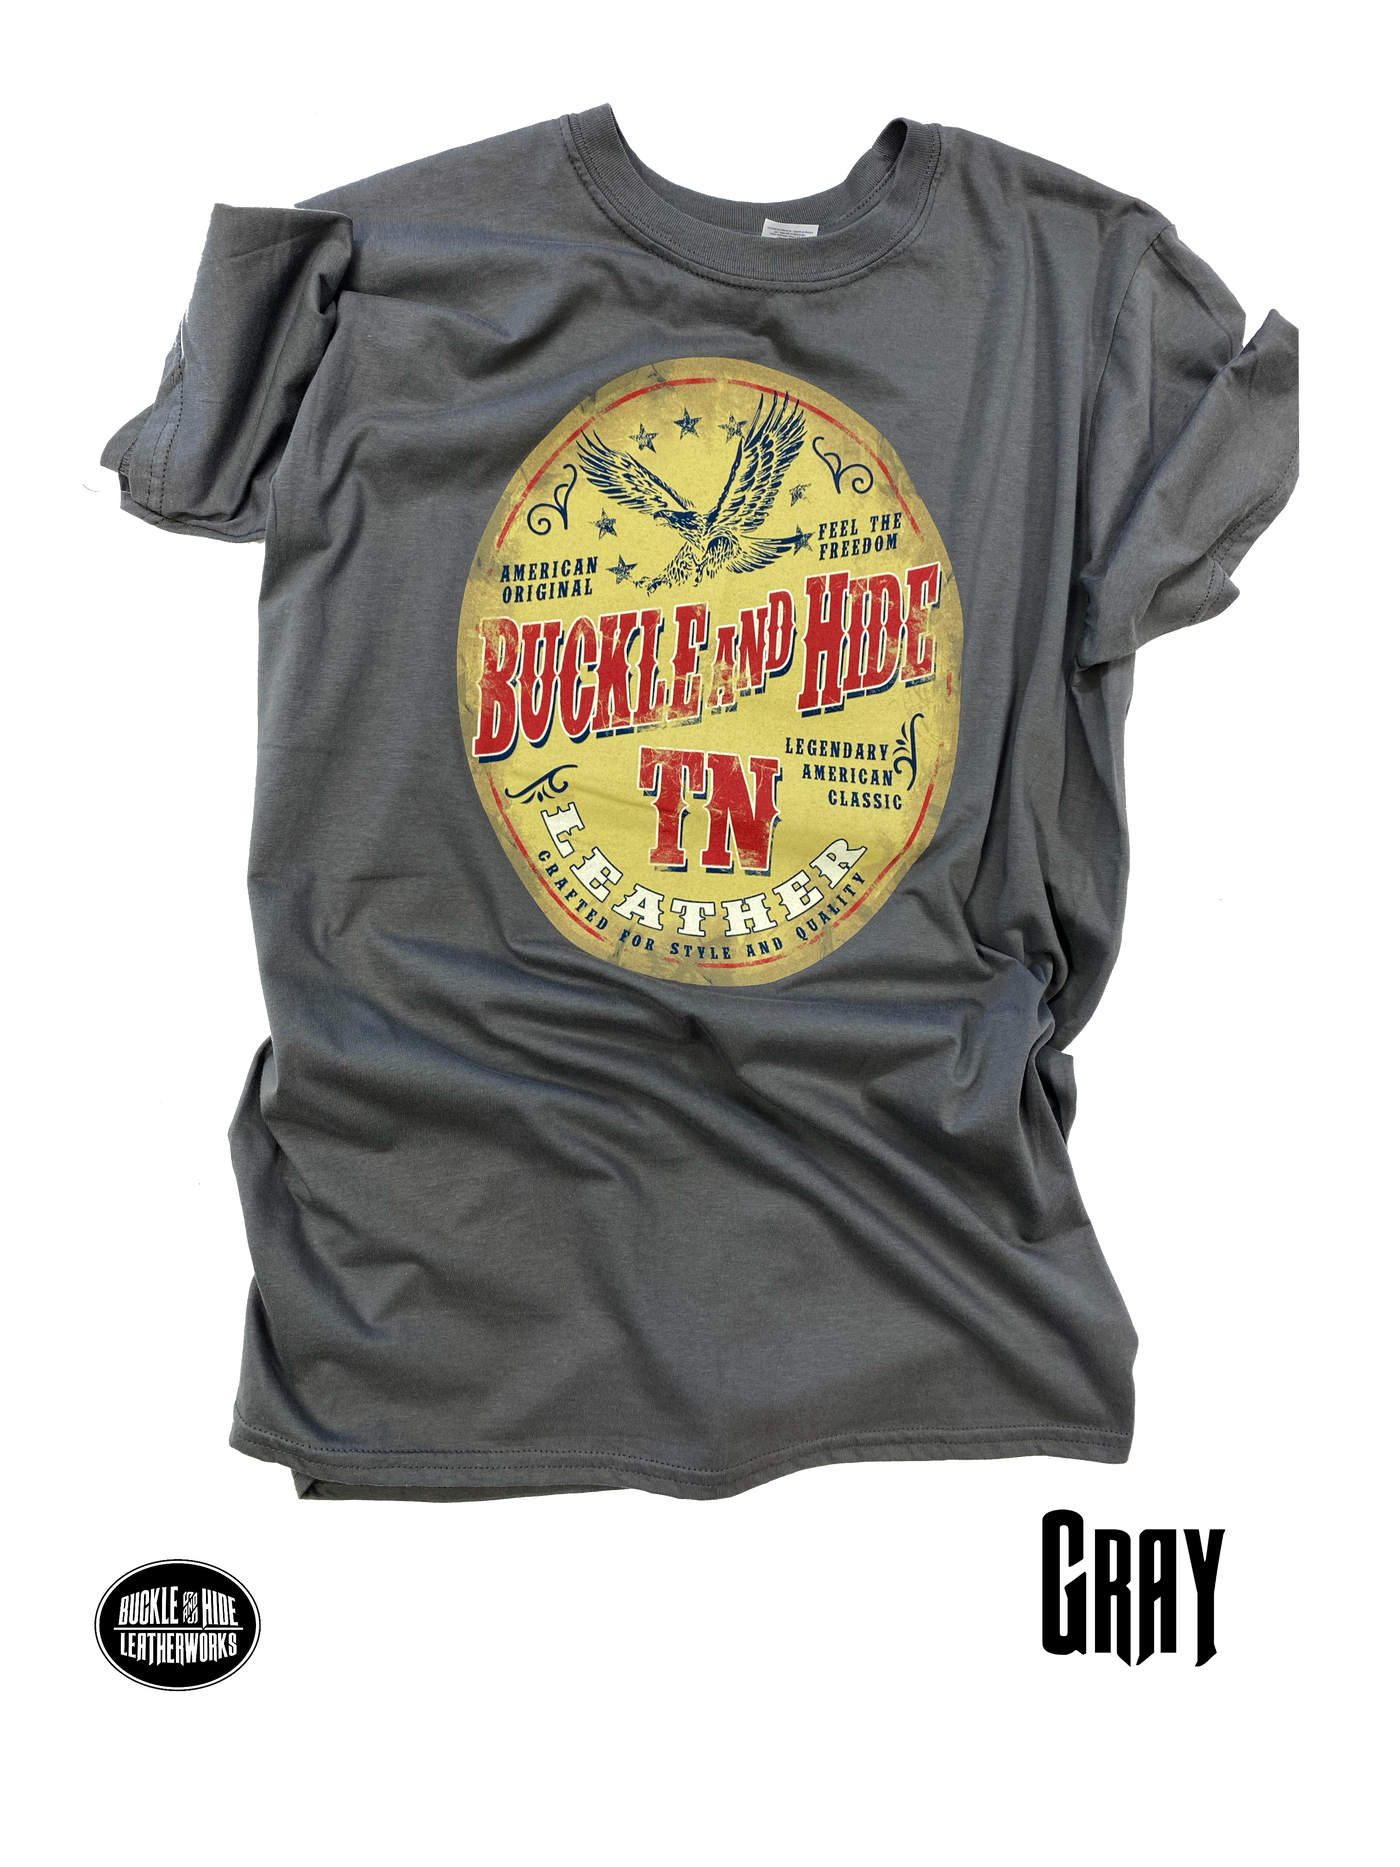 Gray soft cotton T-shirt with "Classic Oval Label" Buckle and Hide graphic. Available in Gray and Charcoal Gray. Available in our shop just outside Nashville in Smyrna, TN.